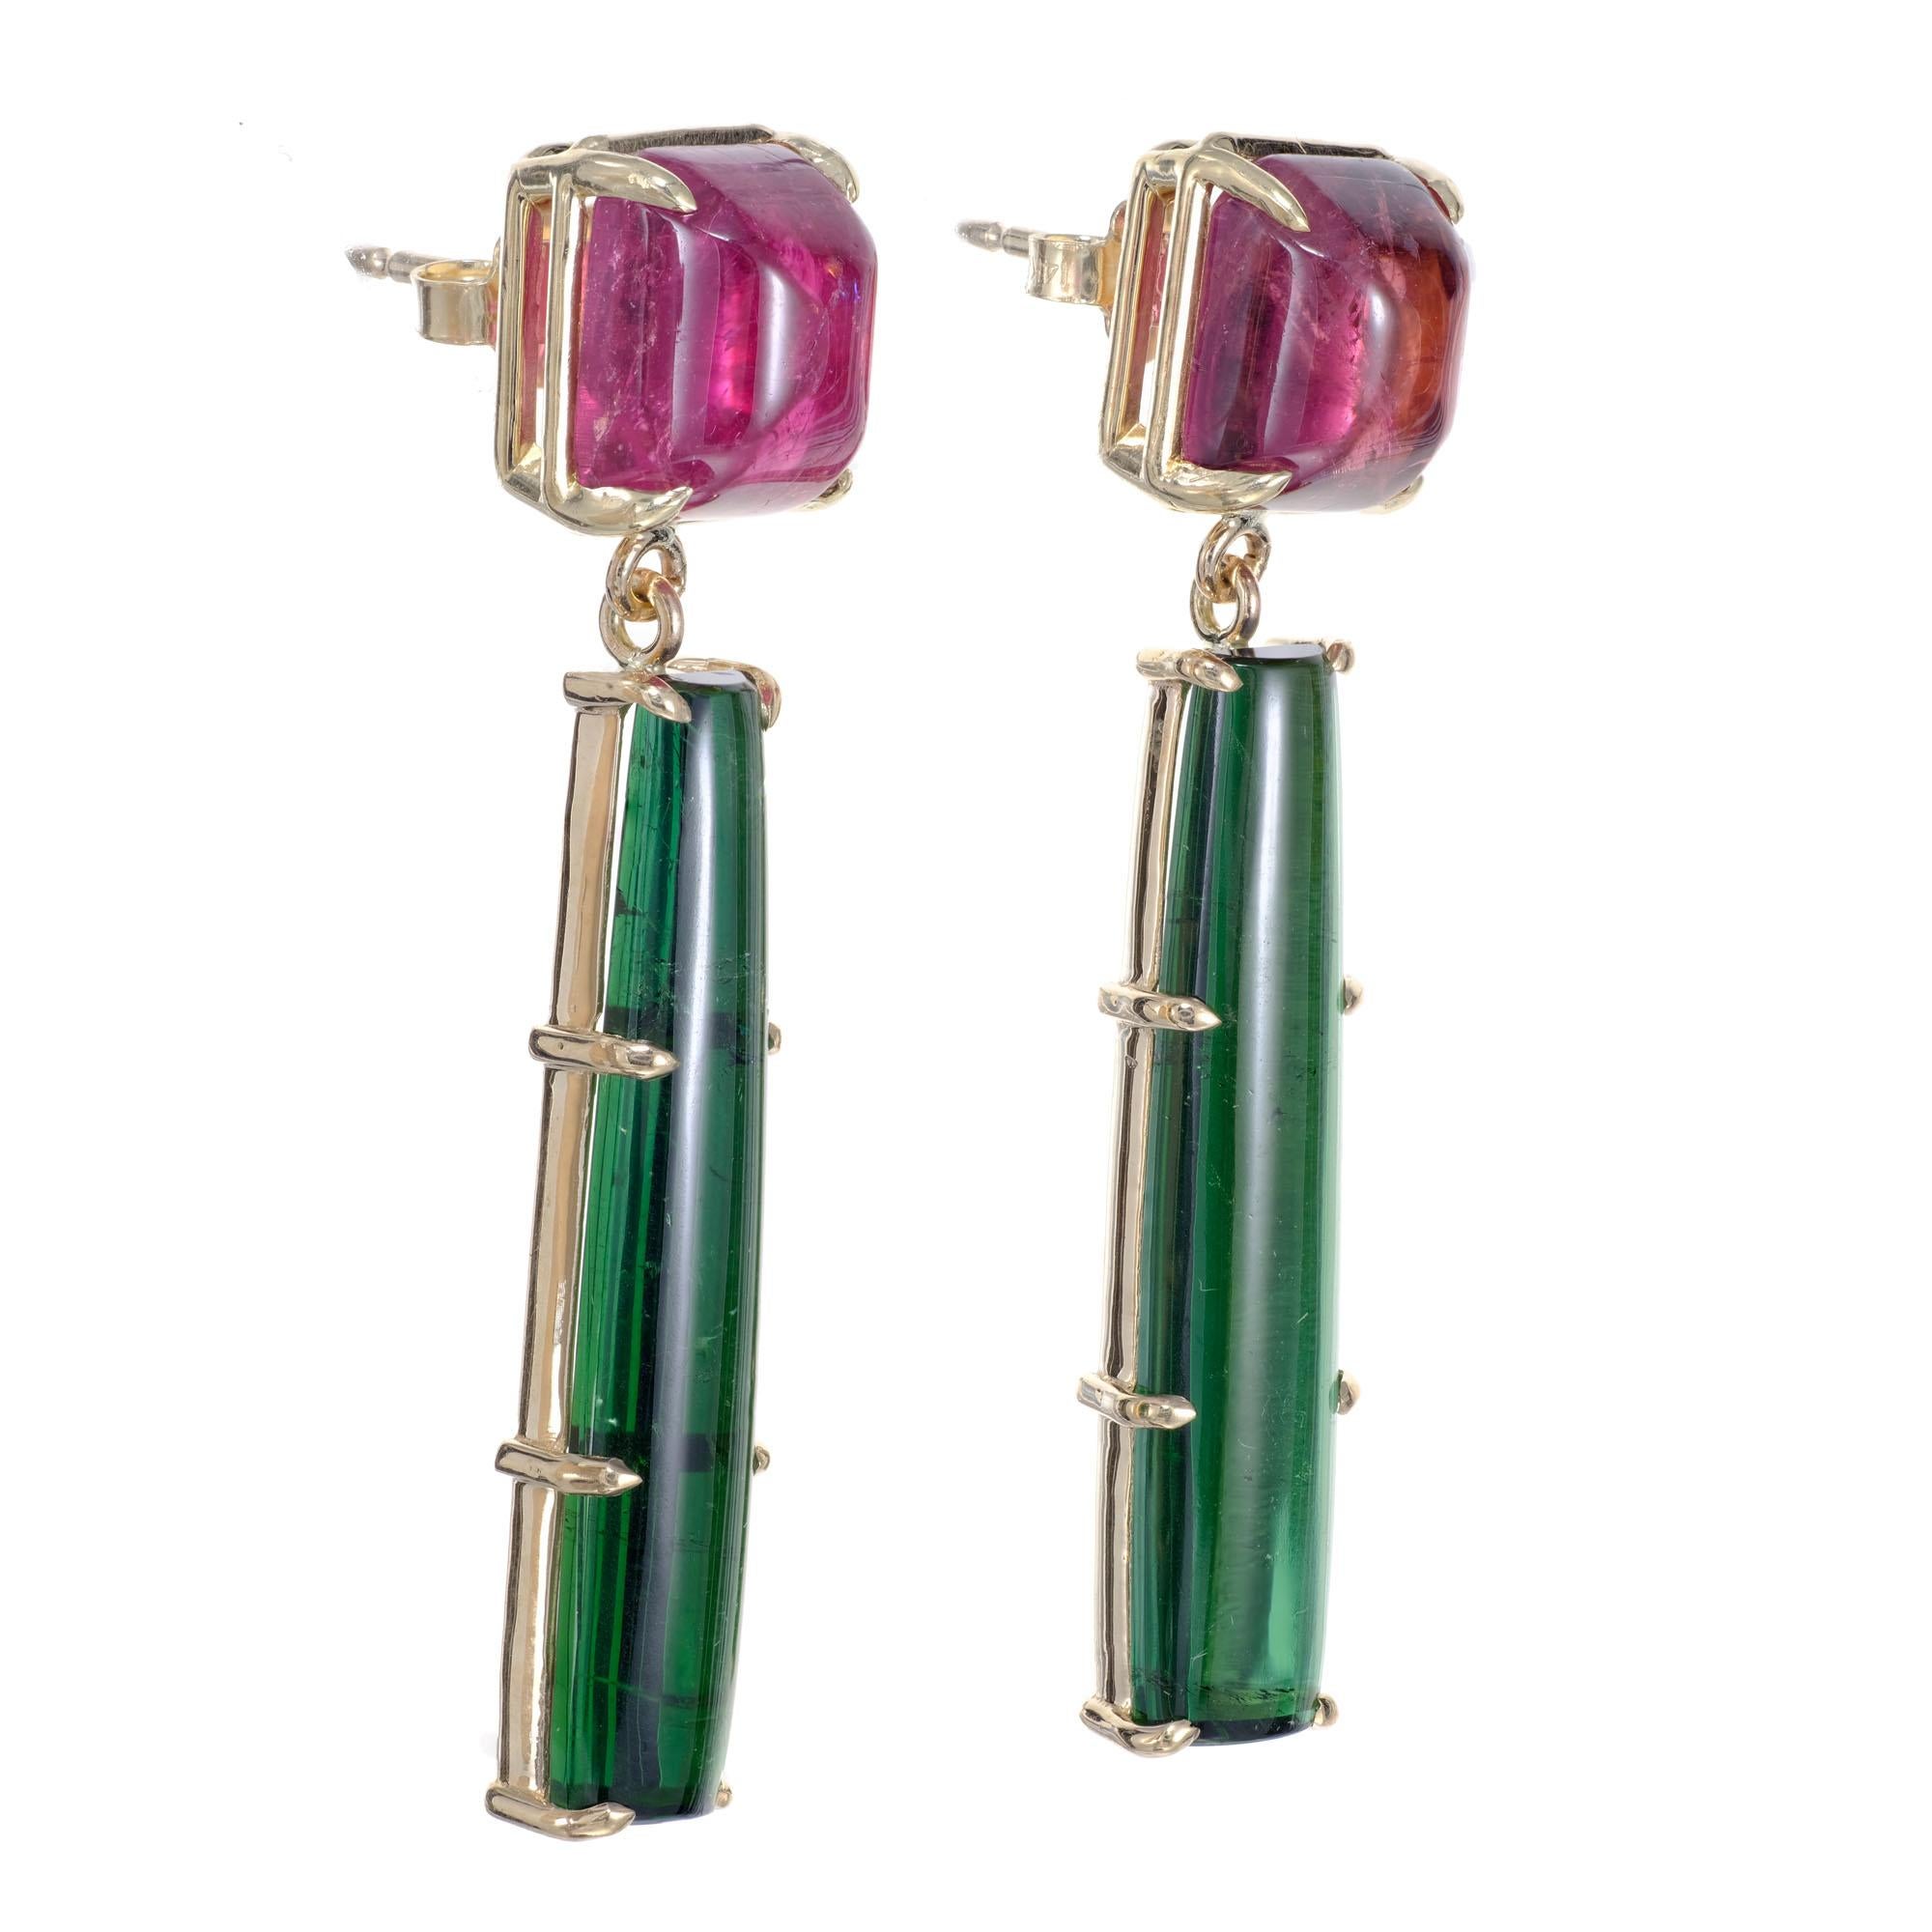 Handmade cabochon reddish pink and bright green tourmaline dangle earrings in 14k yellow gold. Created in the Peter Suchy Workshop.

2 rectangular cabochon pinkish red tourmalines, MI approx. 9.67cts
2 elongated rectangular green tourmalines, MI